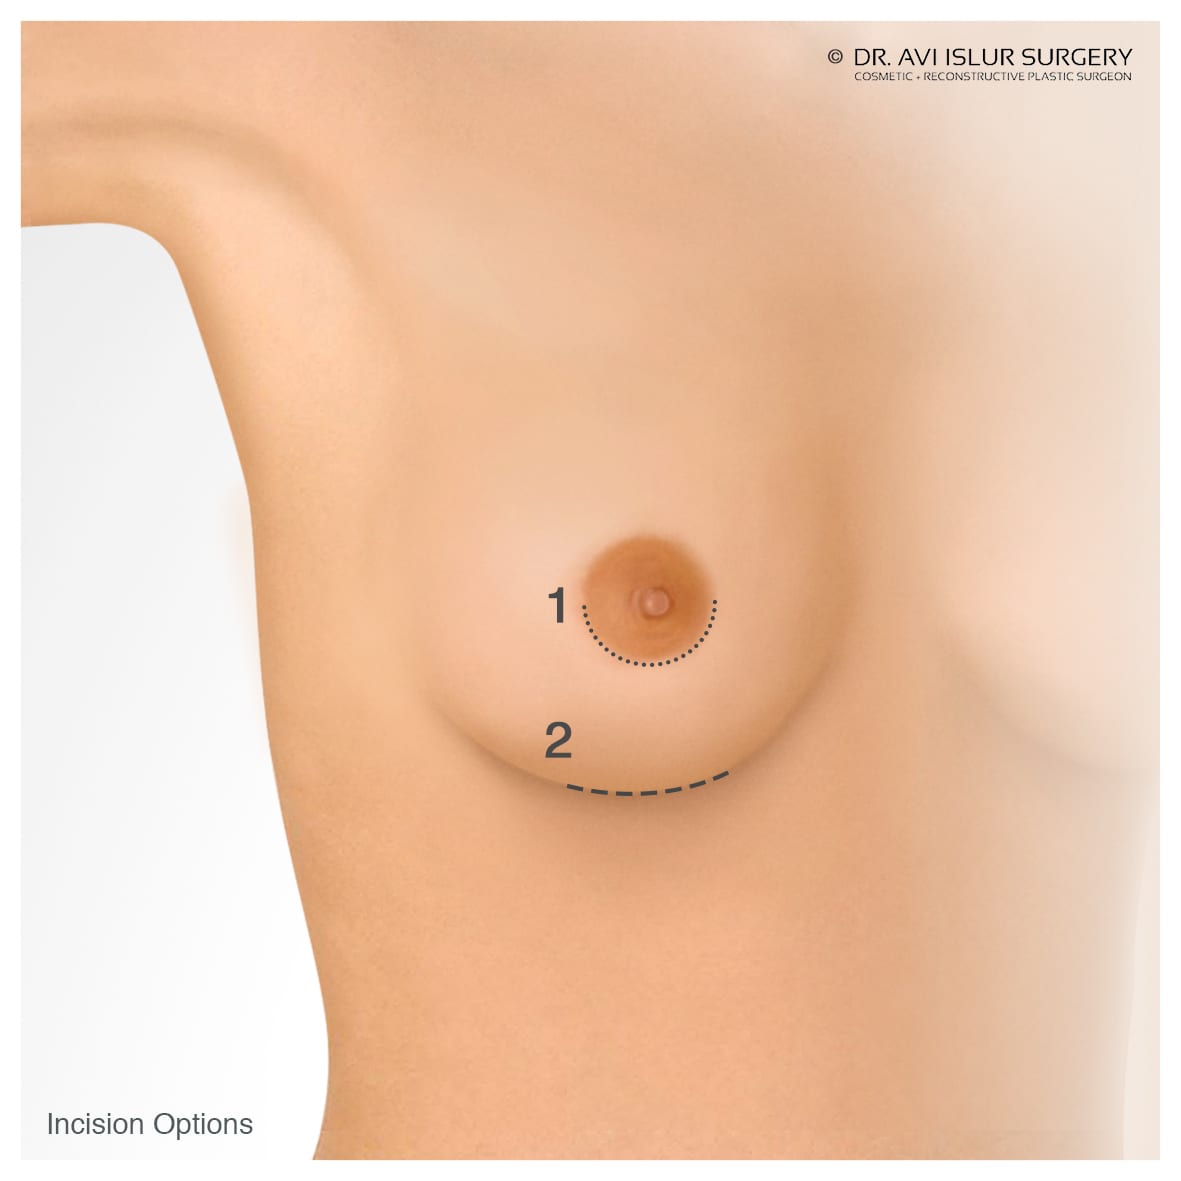 Illustration of Incision options for Breast Implants